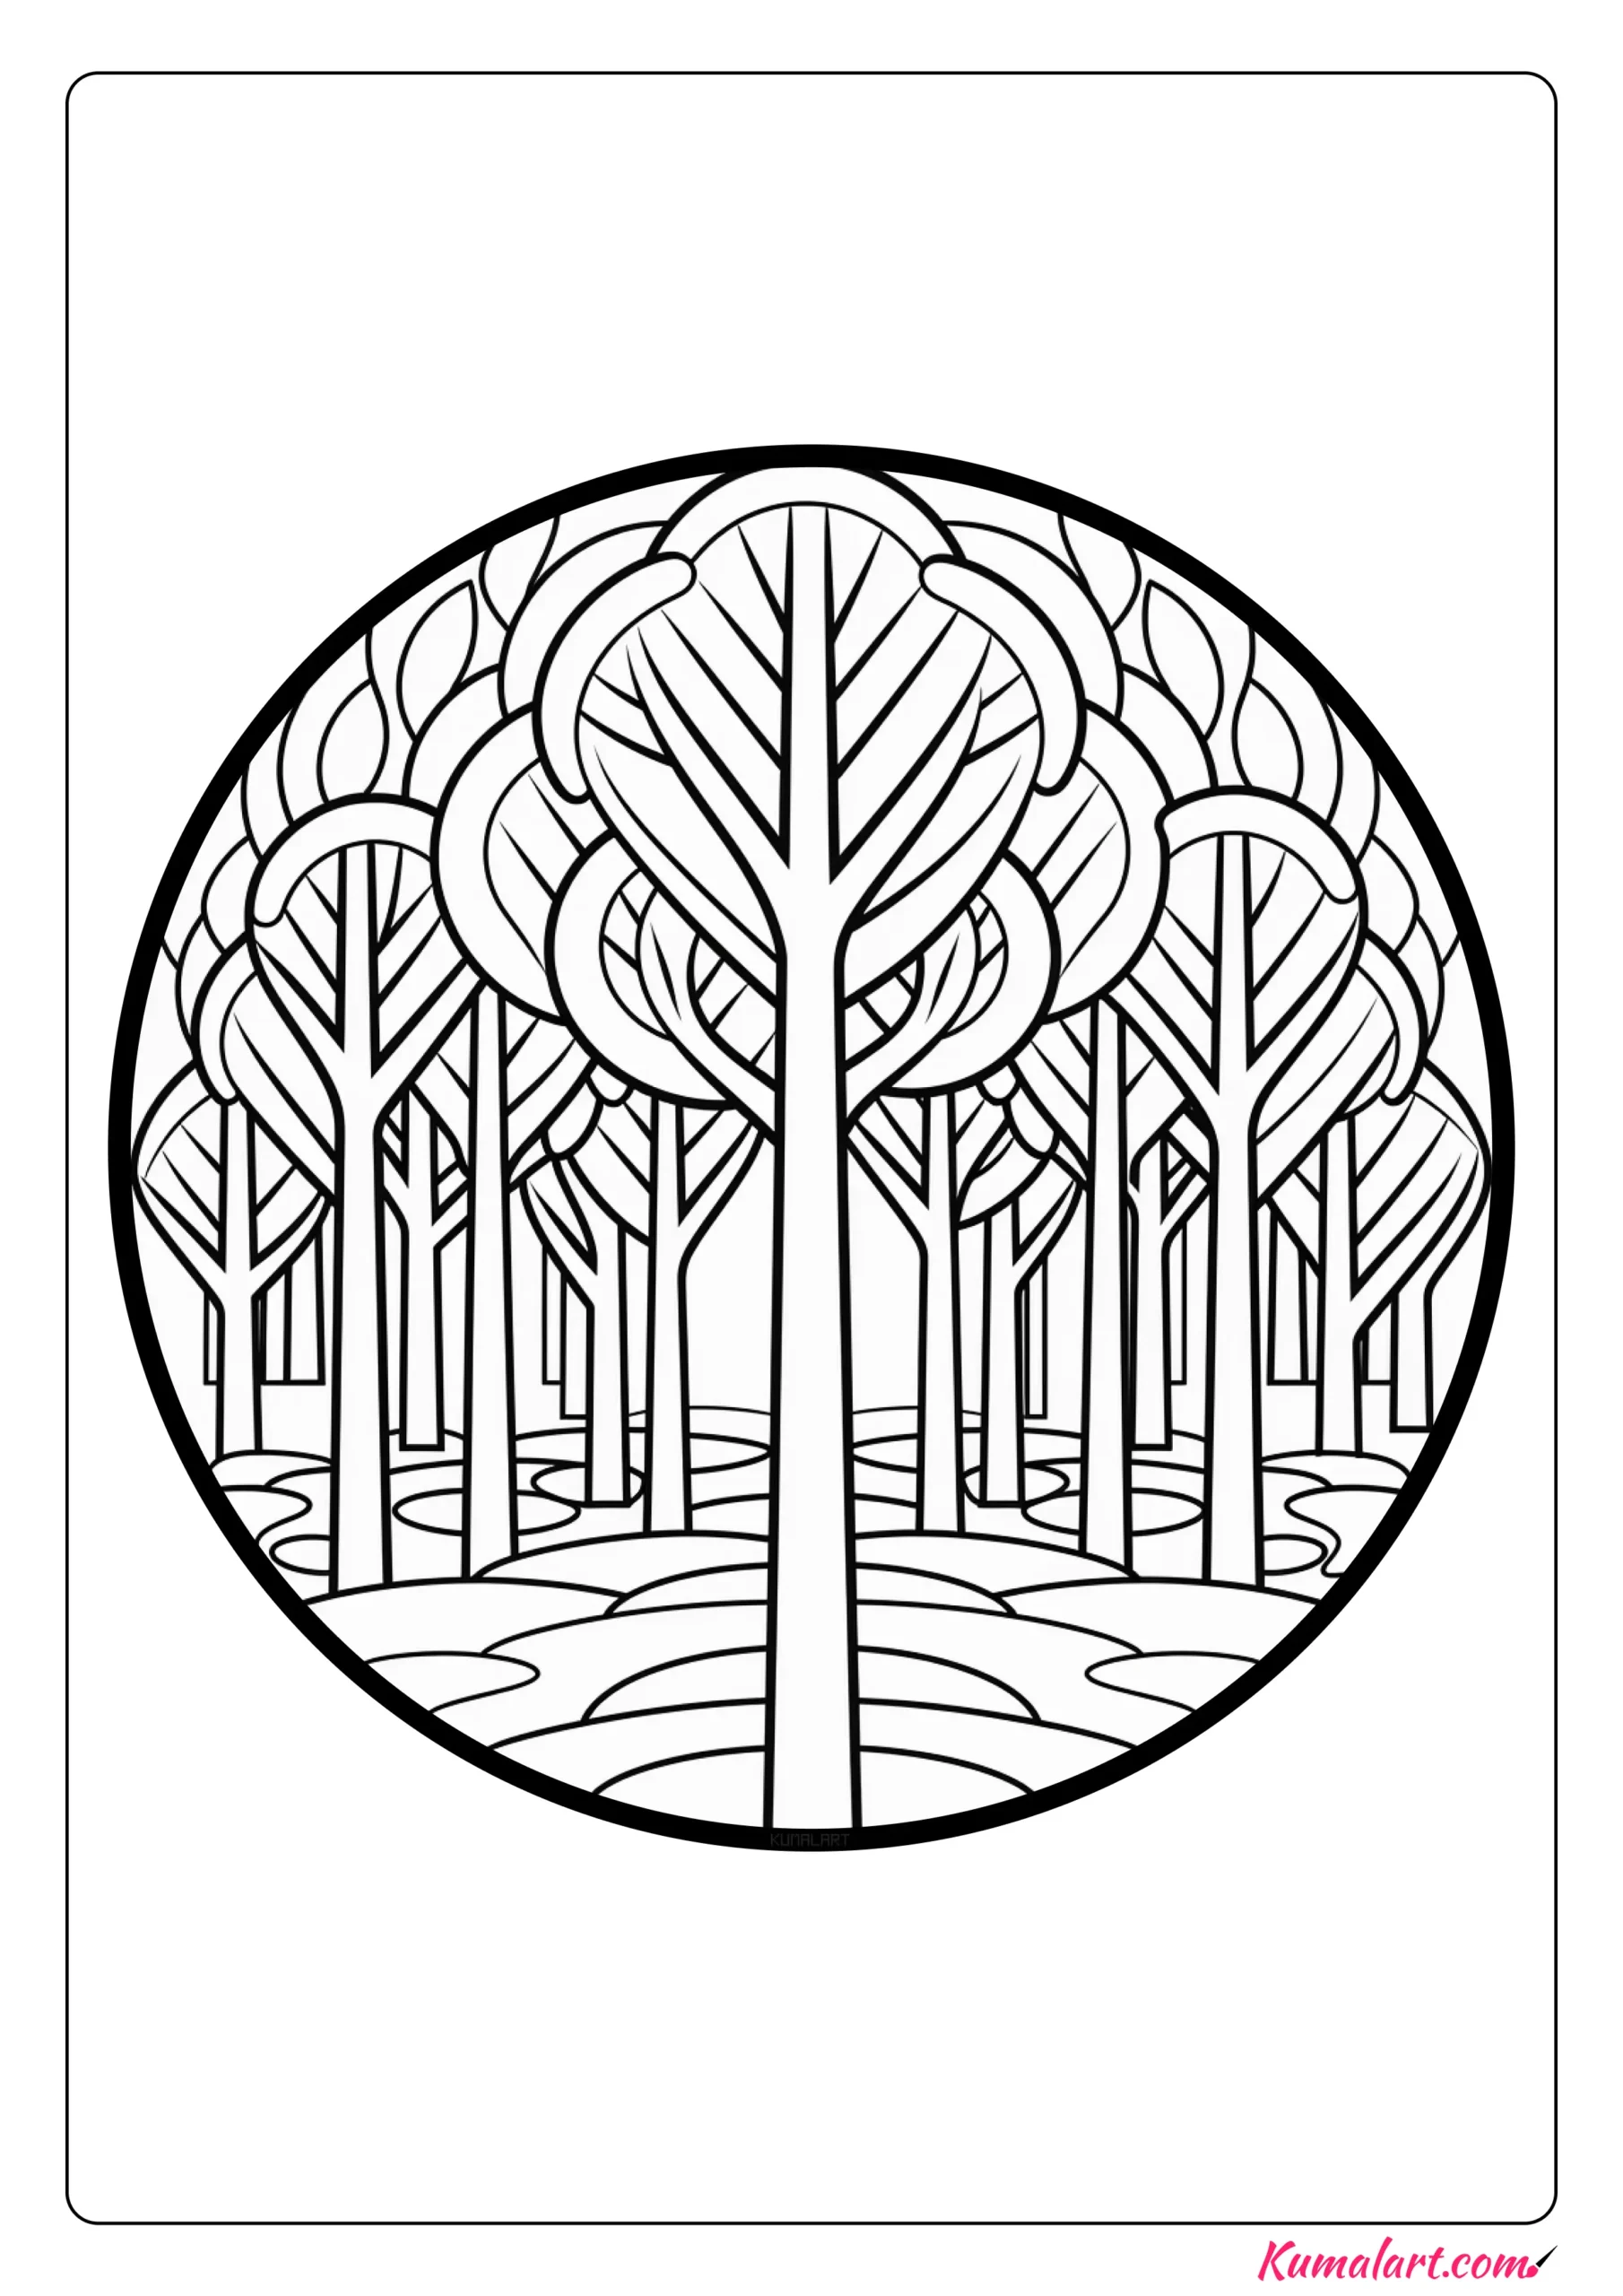 Majestic Forest Coloring Page